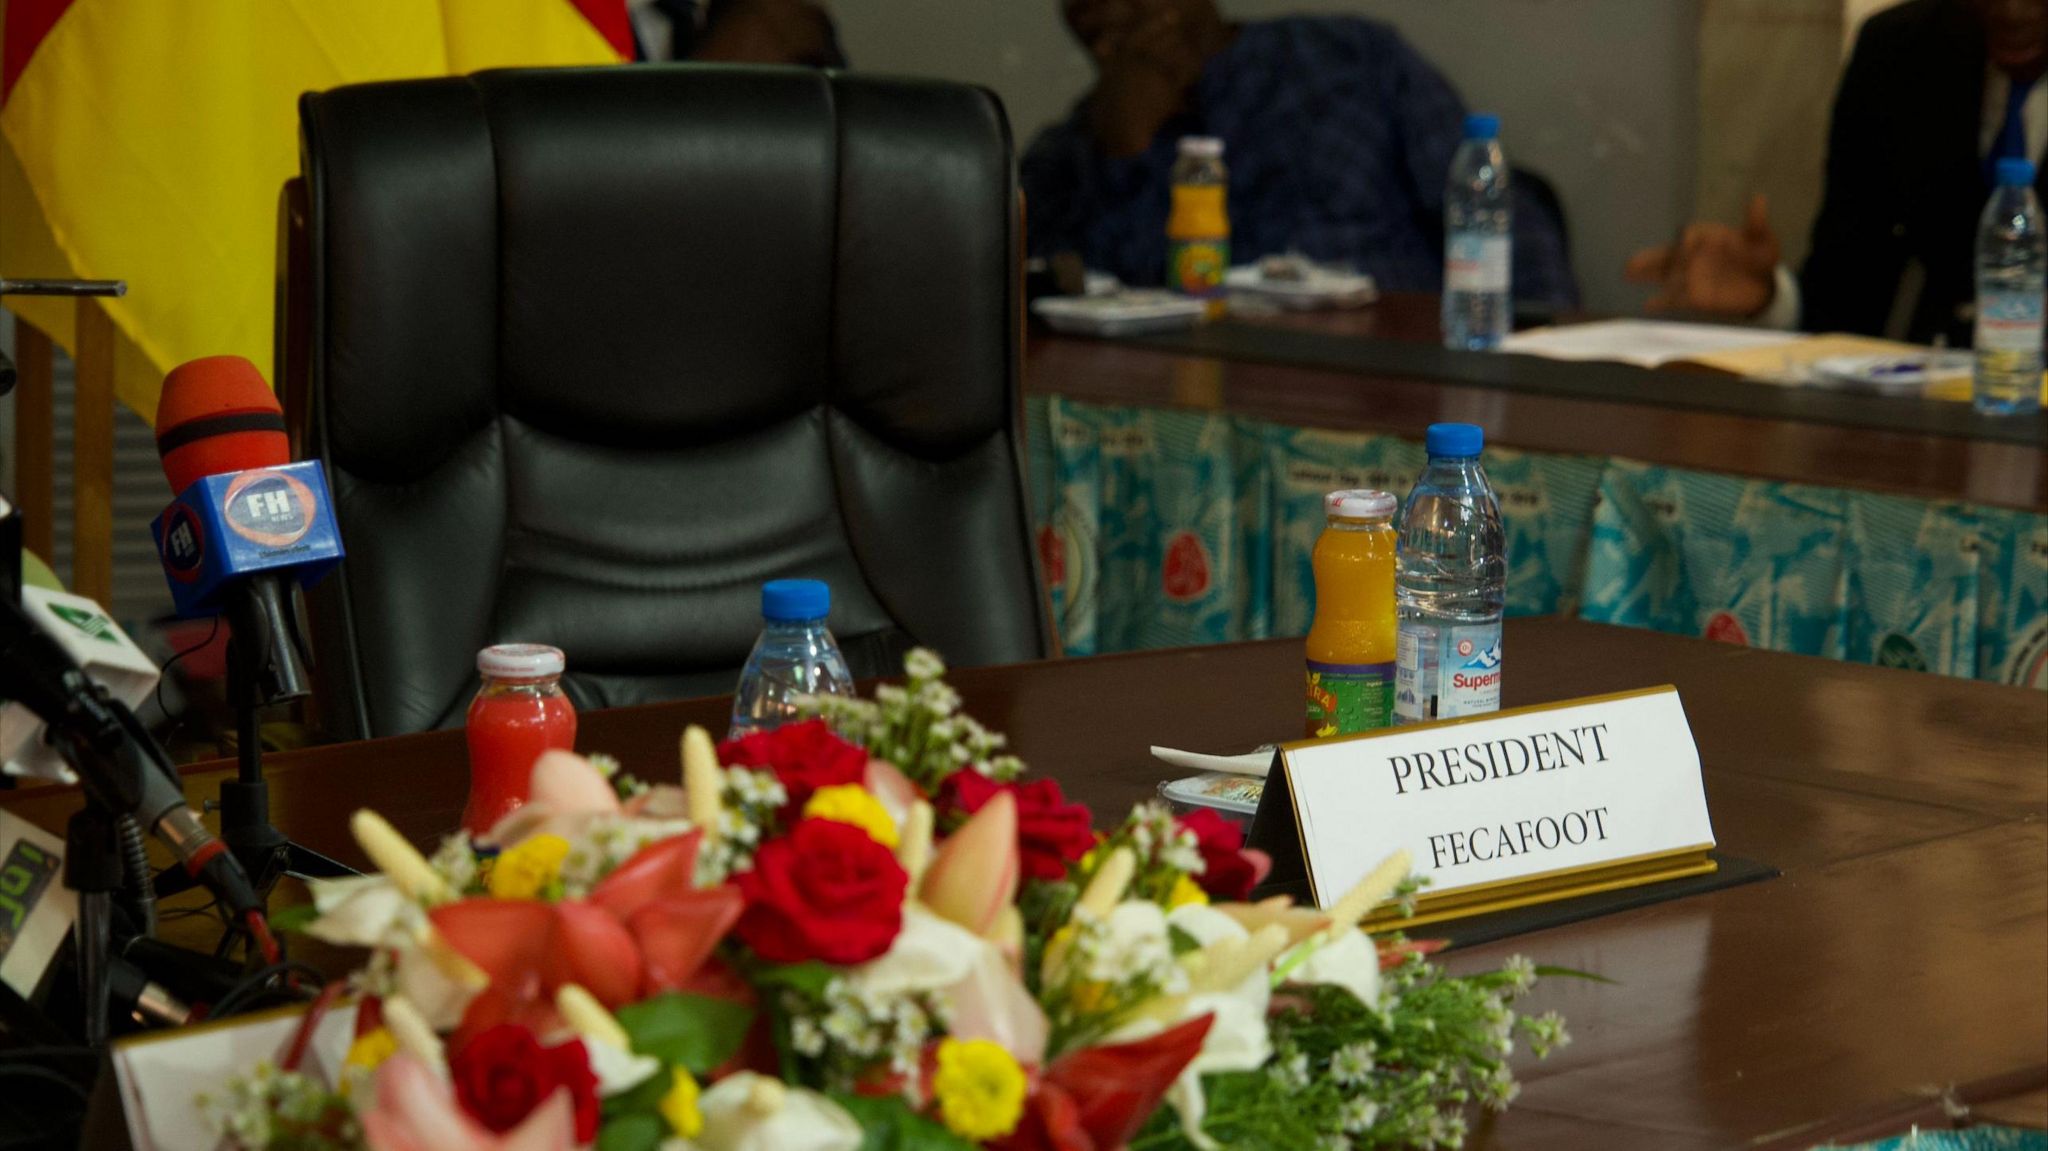 An empty chair sits behind a desk with a place card for the Fecafoot president, microphones and flowers